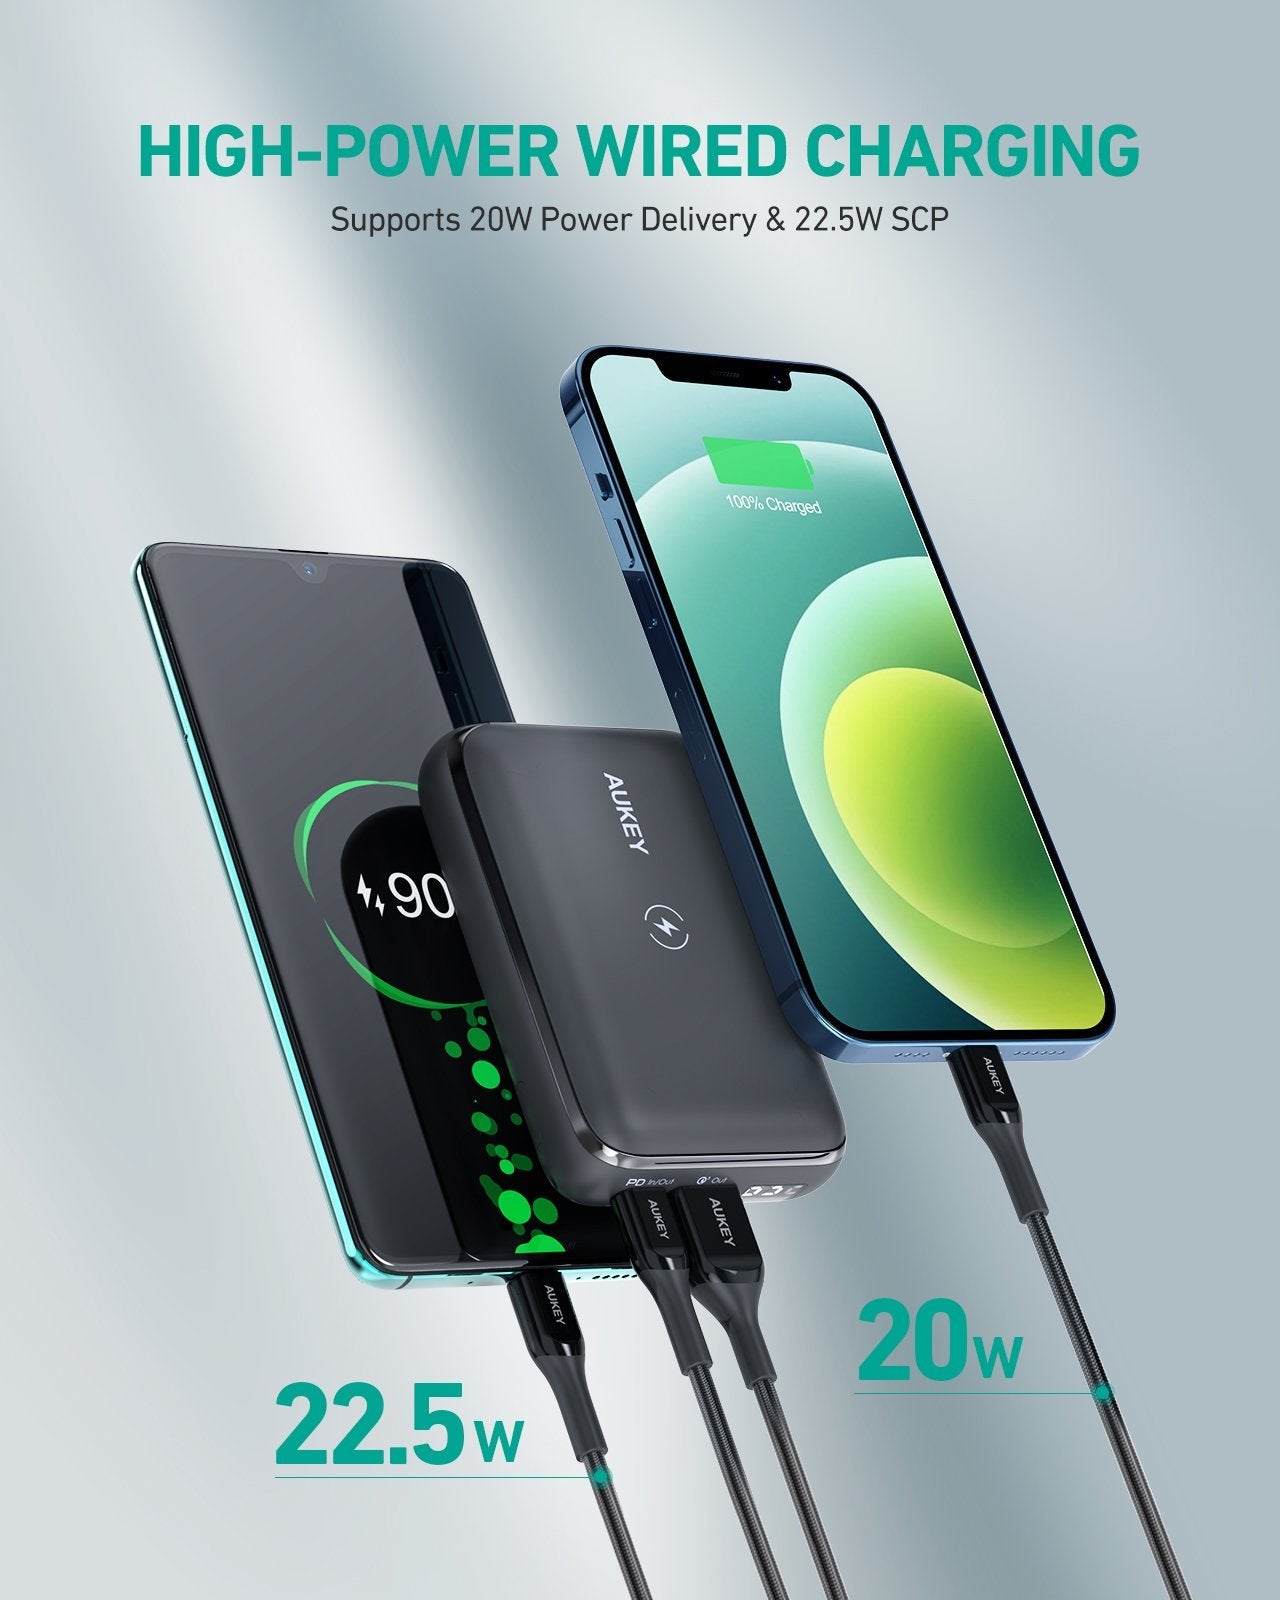 AUKEY Wireless 10000mAh USB-C PD QC3.0 Portable Phone Charger Power Bank Battery